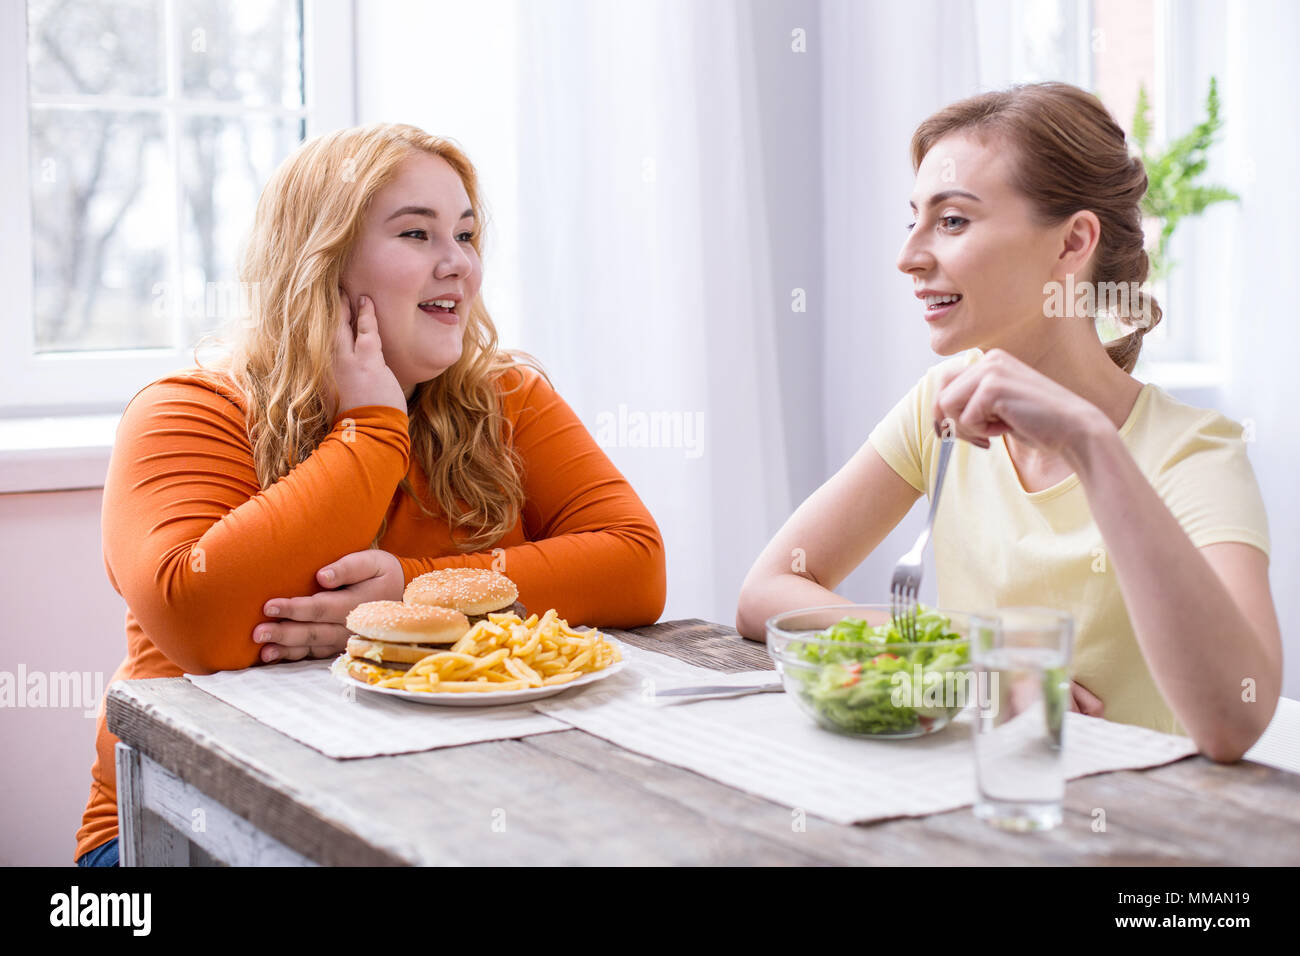 Happy fat woman having lunch with her friend Stock Photo